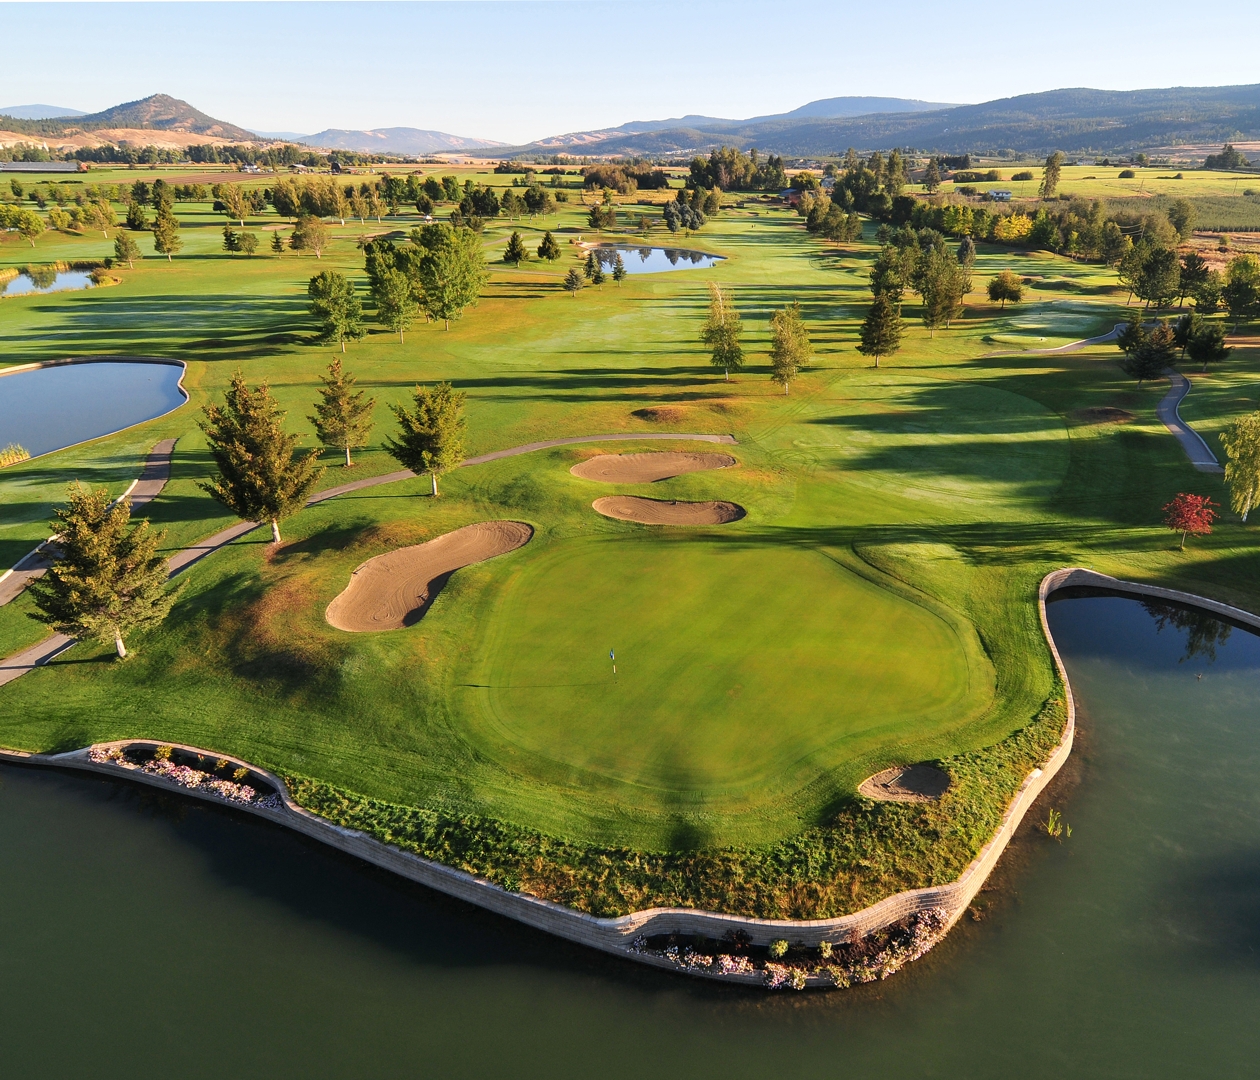 Golf Course Review Kelowna Springs Golf Club Kelowna British with The Most Amazing  golfing kelowna intended for  Property